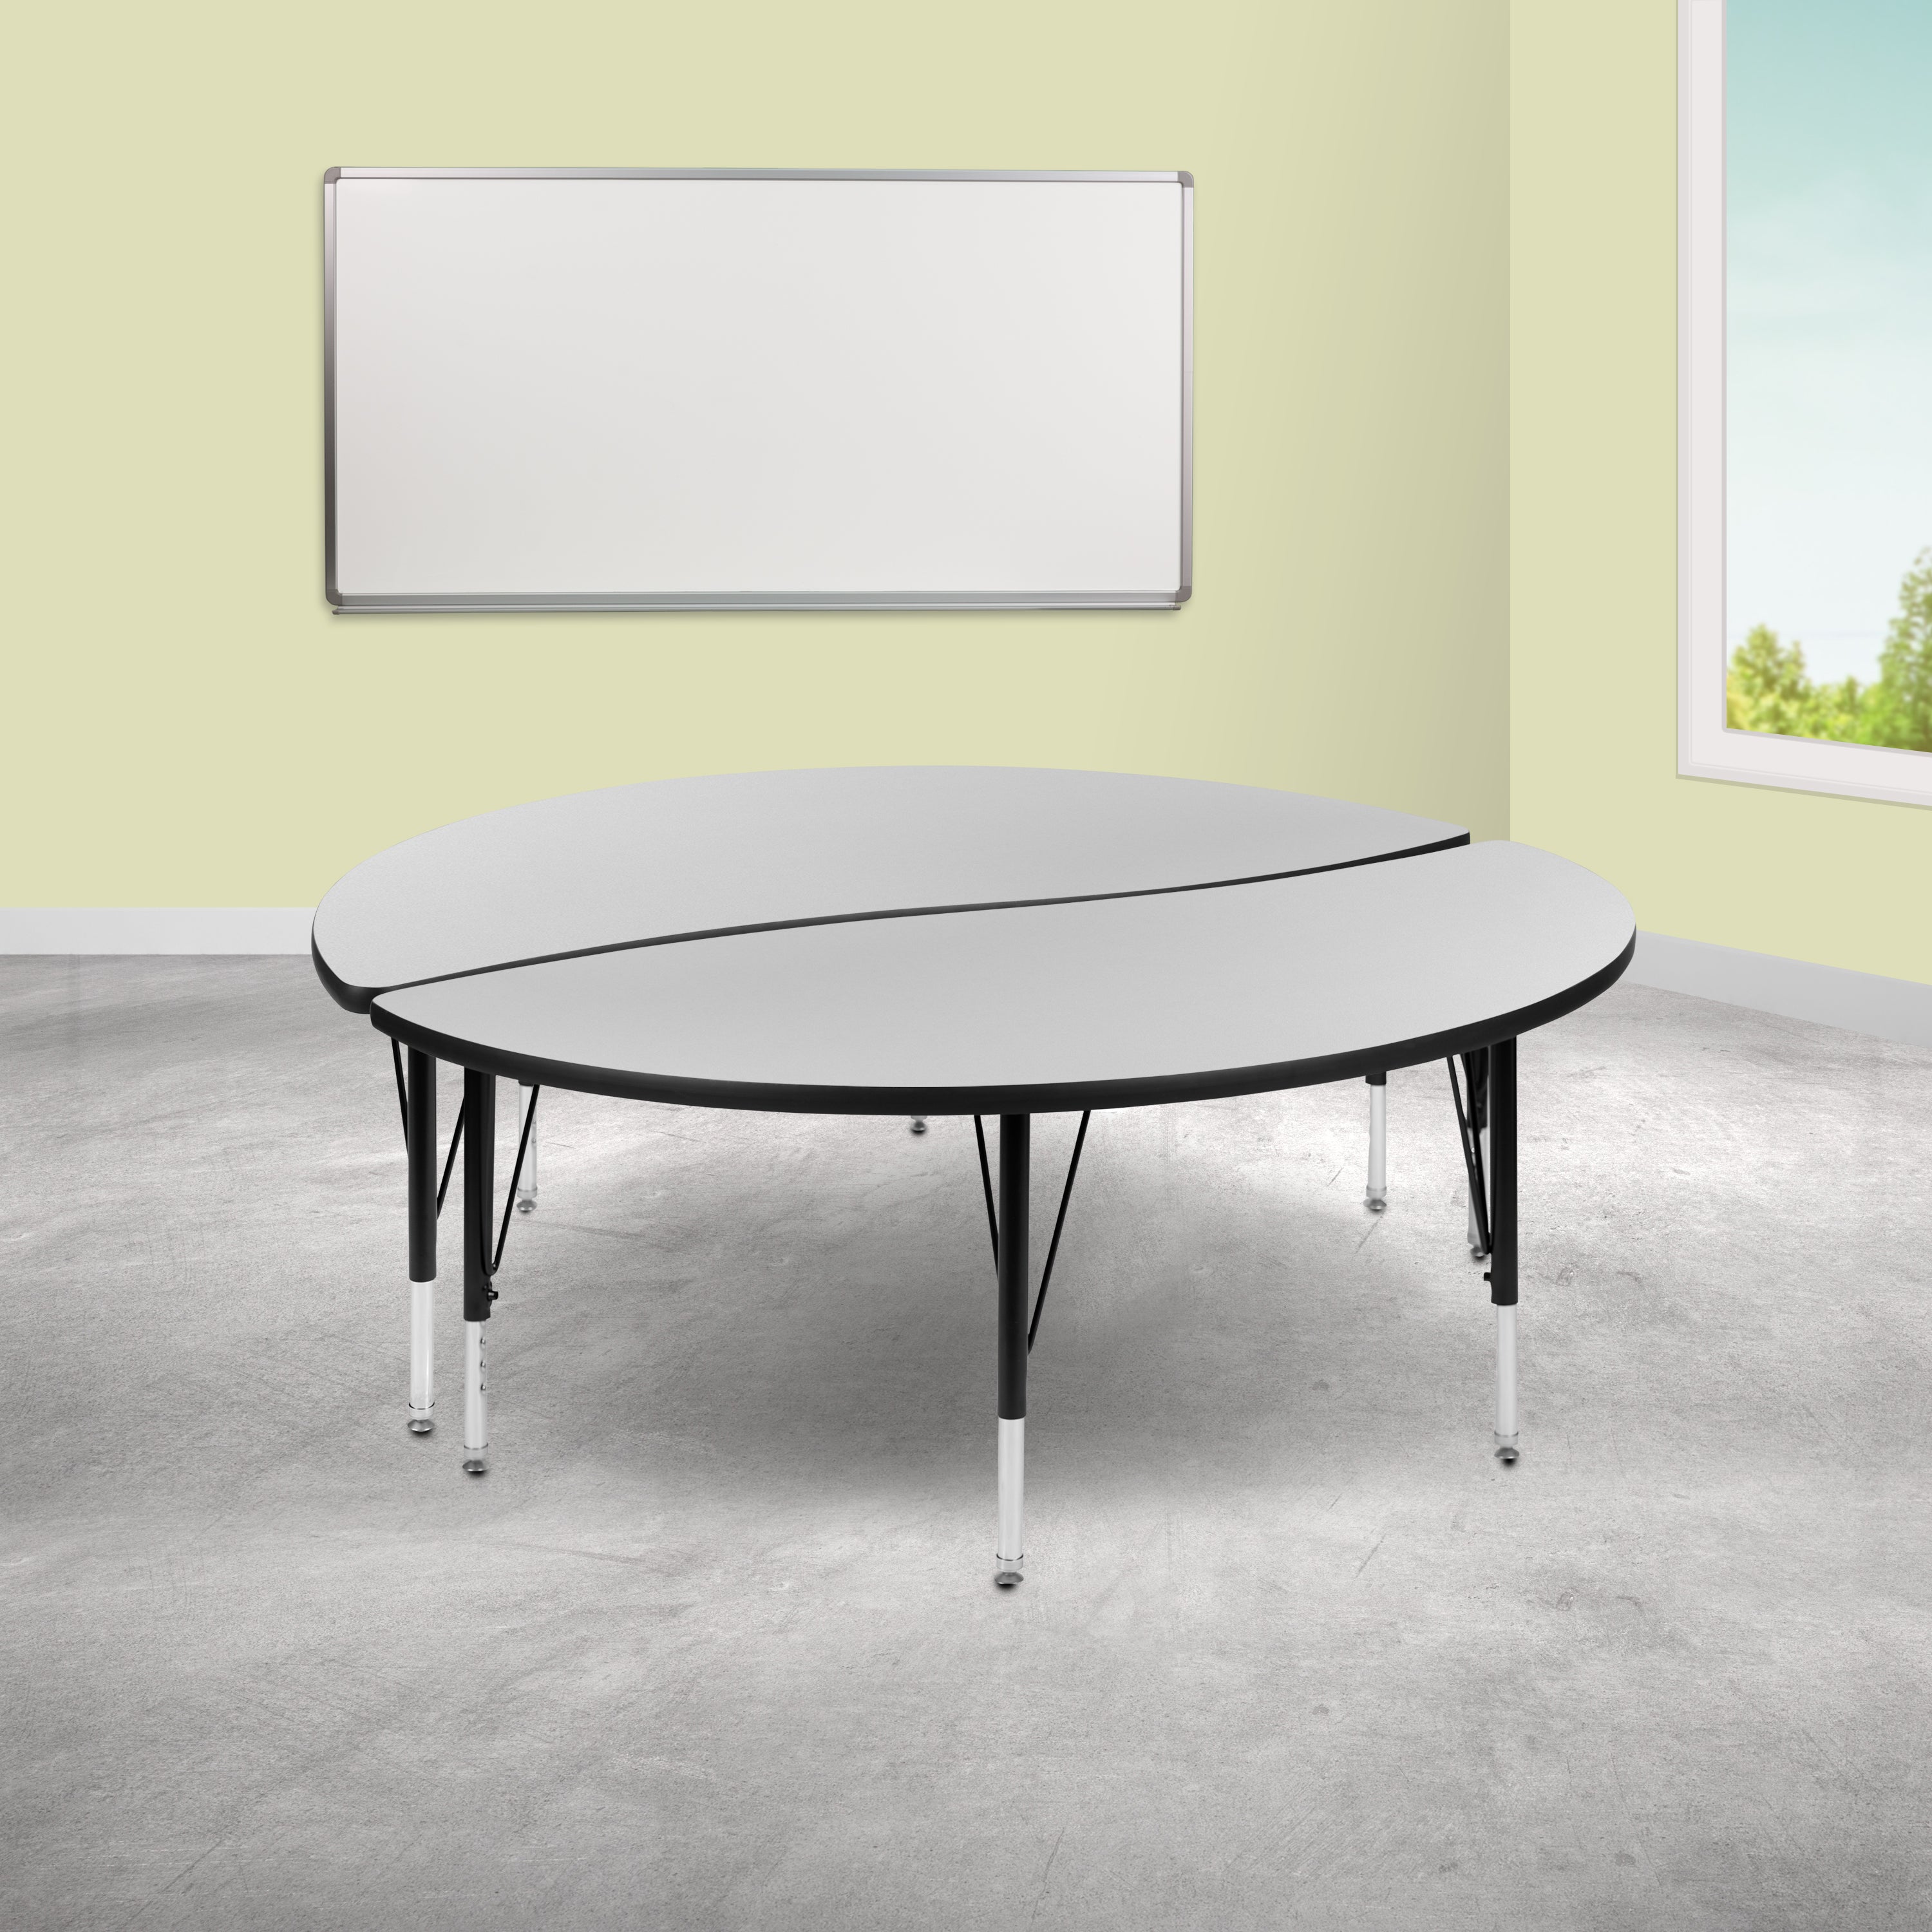 2 Piece 60" Circle Wave Flexible Grey Thermal Laminate Activity Table Set - Height Adjustable Short Legs-Collaborative Activity Table Set-Flash Furniture-Wall2Wall Furnishings